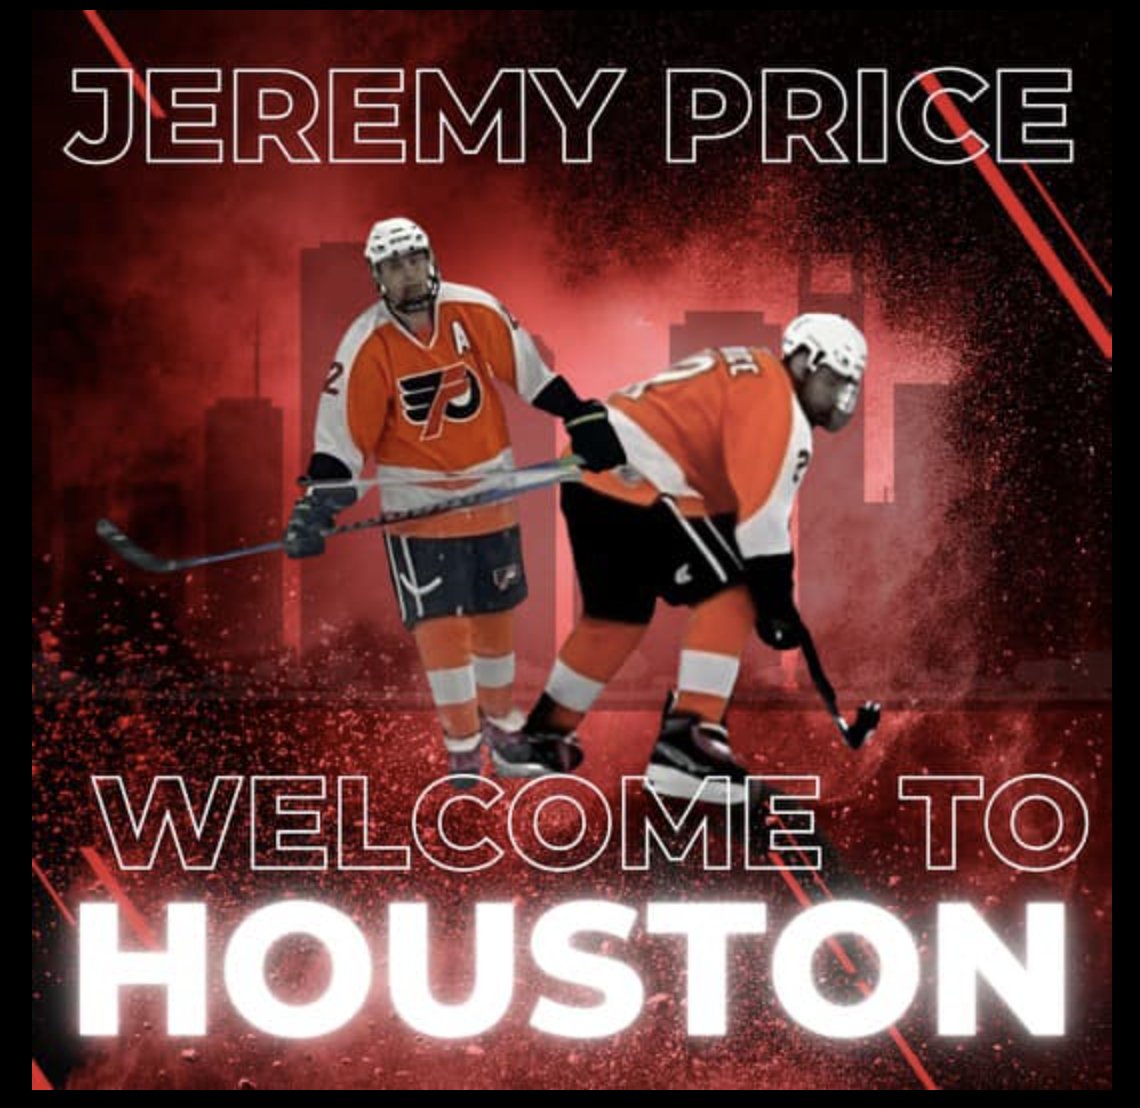 ISHL alumnus, Jeremy Price, former Alternate captain for Pearland / Friendswood, #2, is a new UH Hockey Cougar! He will be joining the UH team in the fall 2024. We are proud of you! 🧡